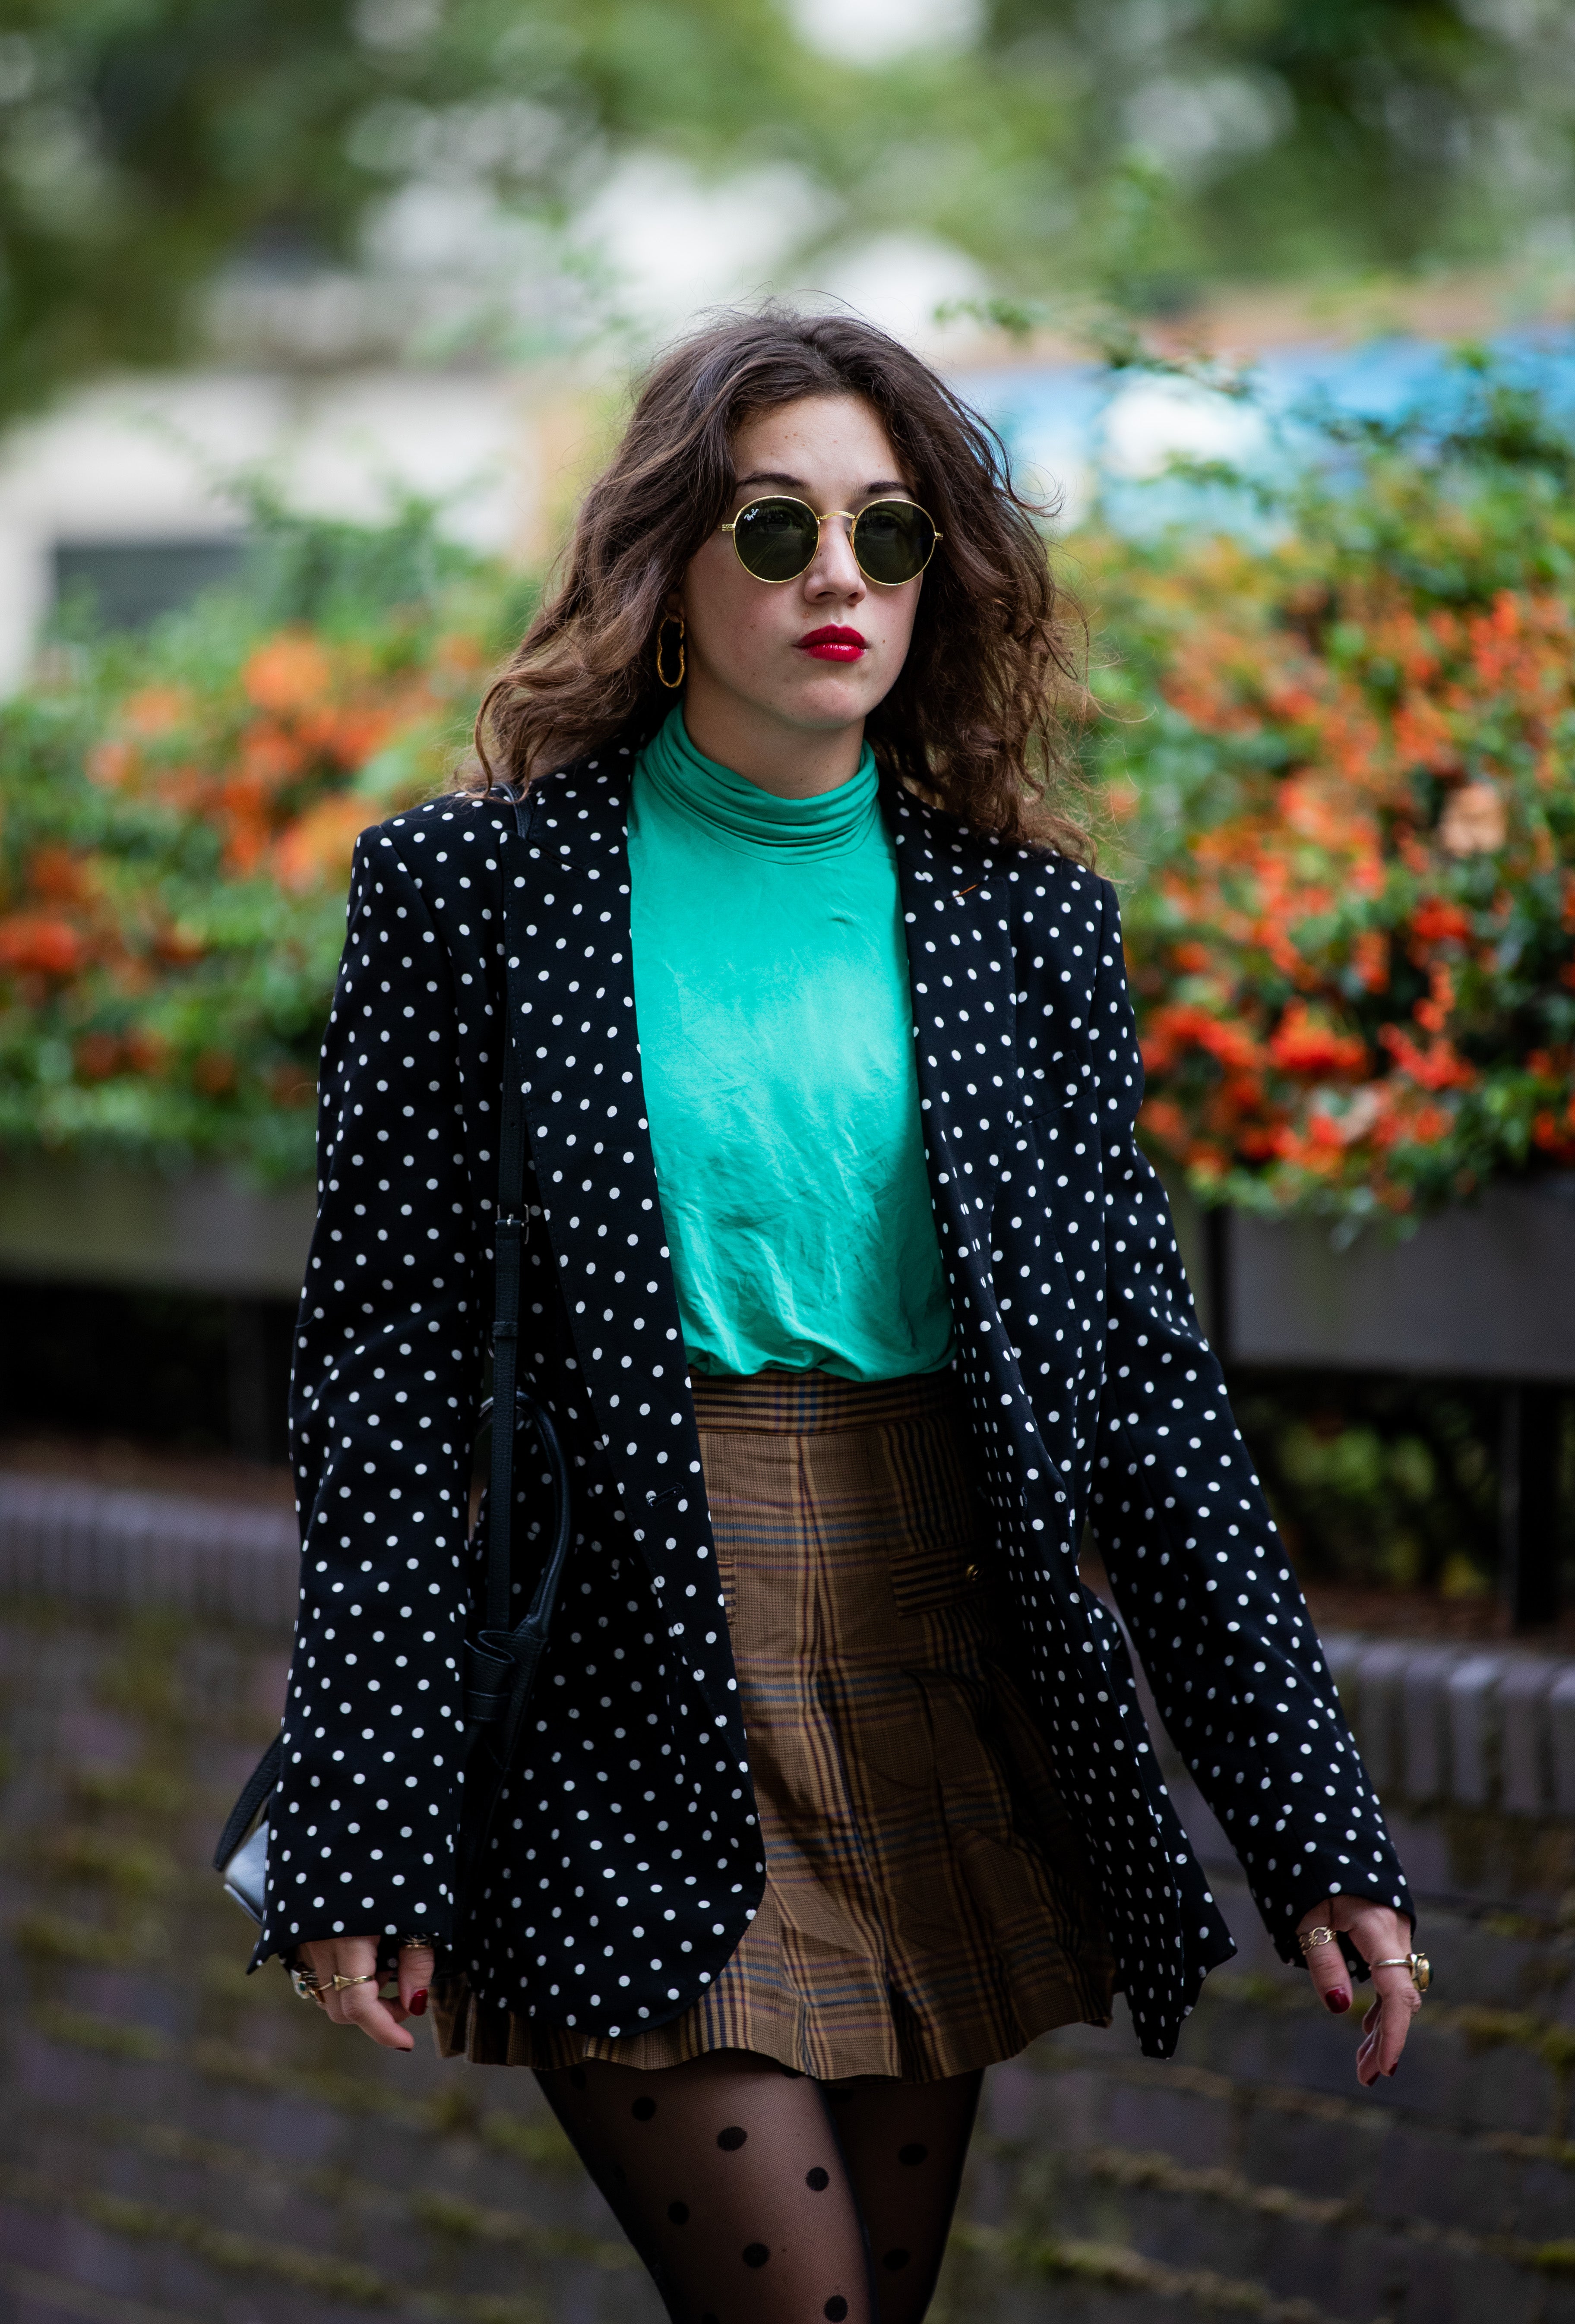 Another LFW shot, the polka dot jacket here was rented from Hurr.